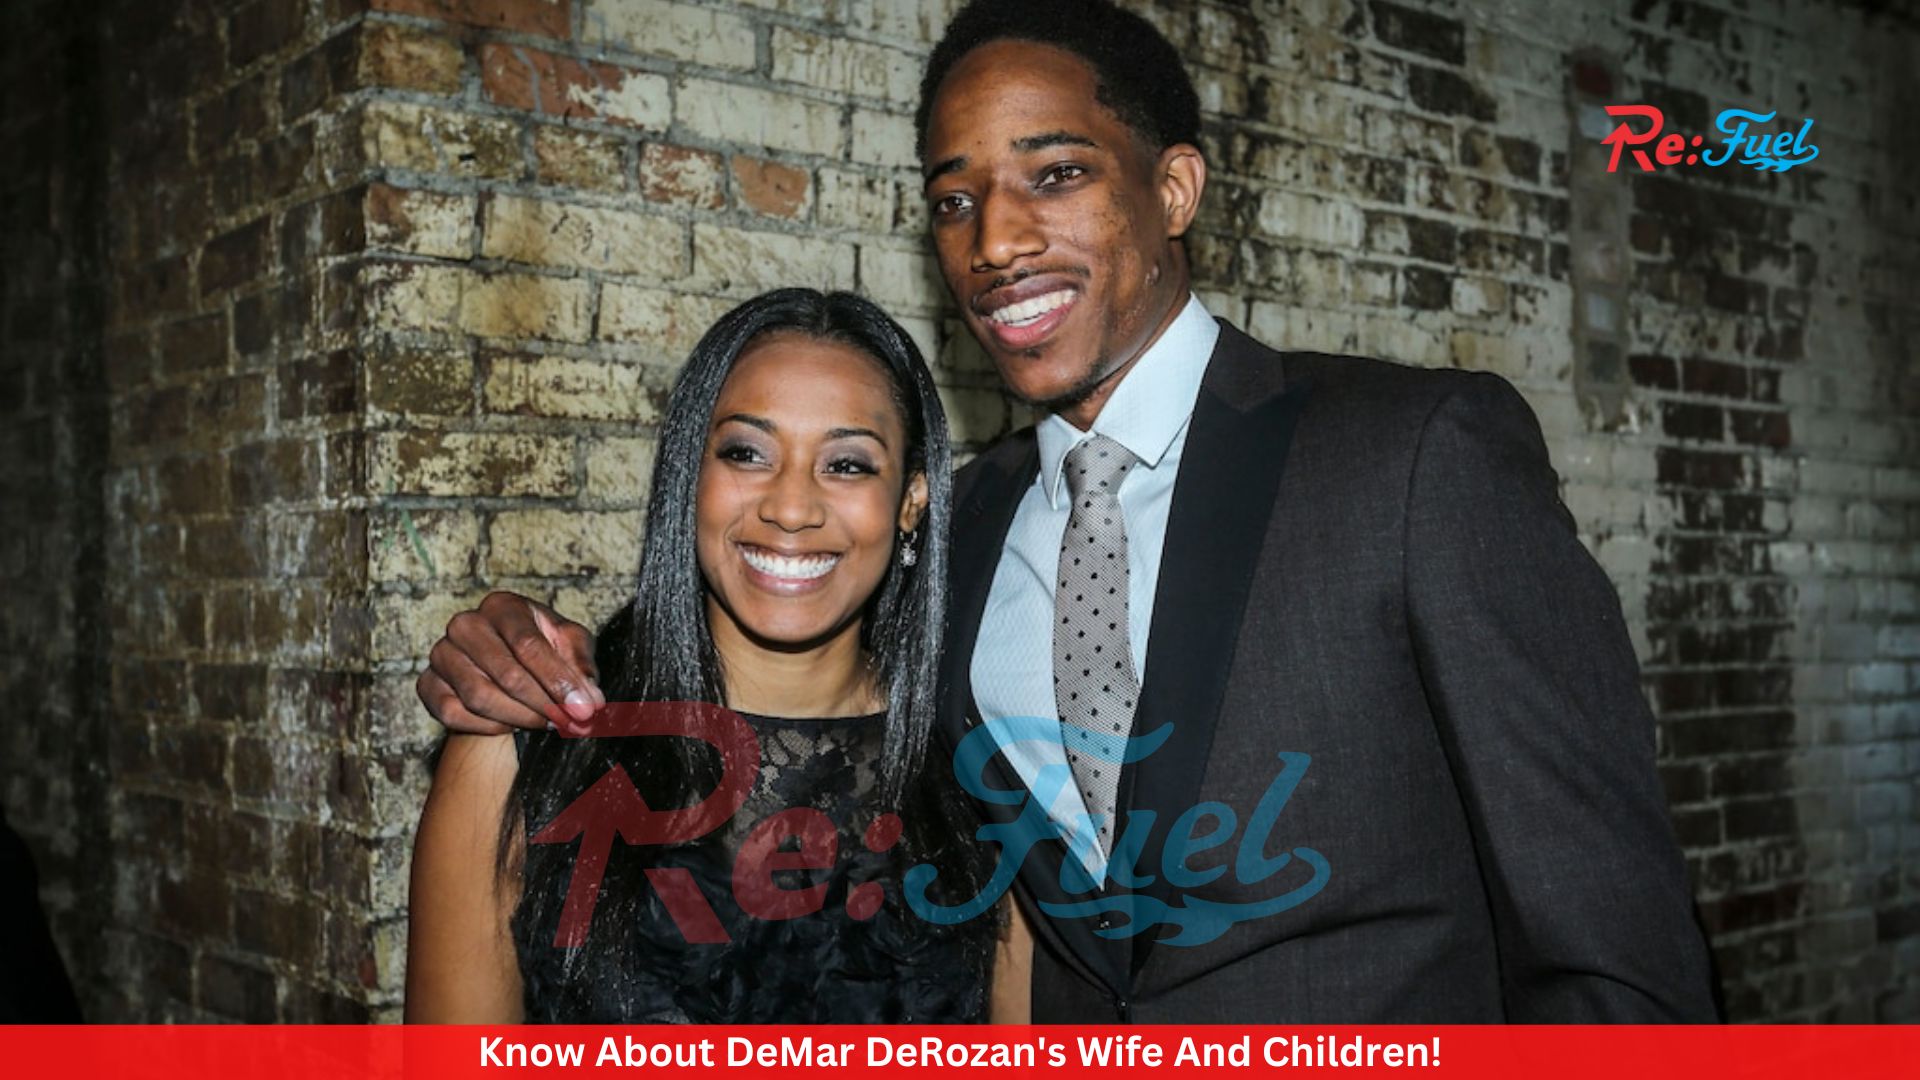 Know About DeMar DeRozan's Wife And Children!